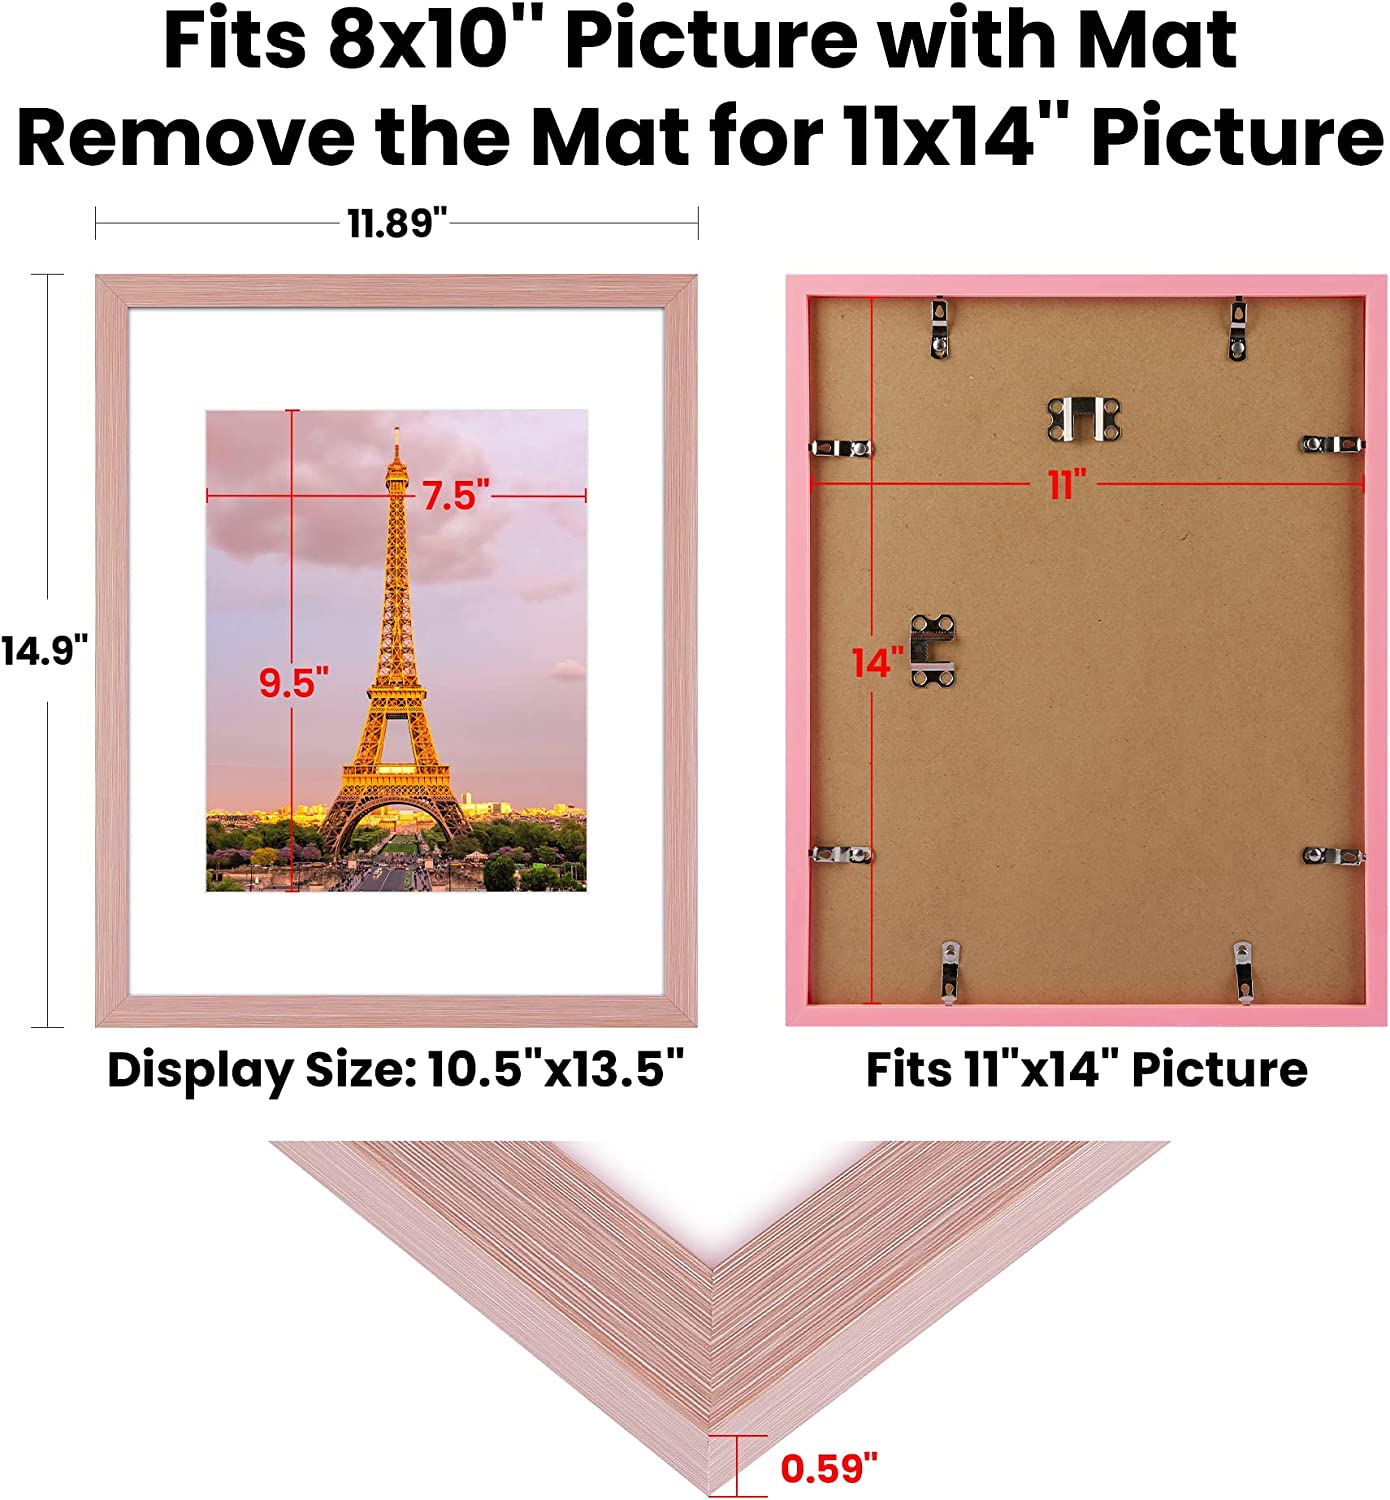 upsimples 11x14 Picture Frame Set of 3, Made of High Definition